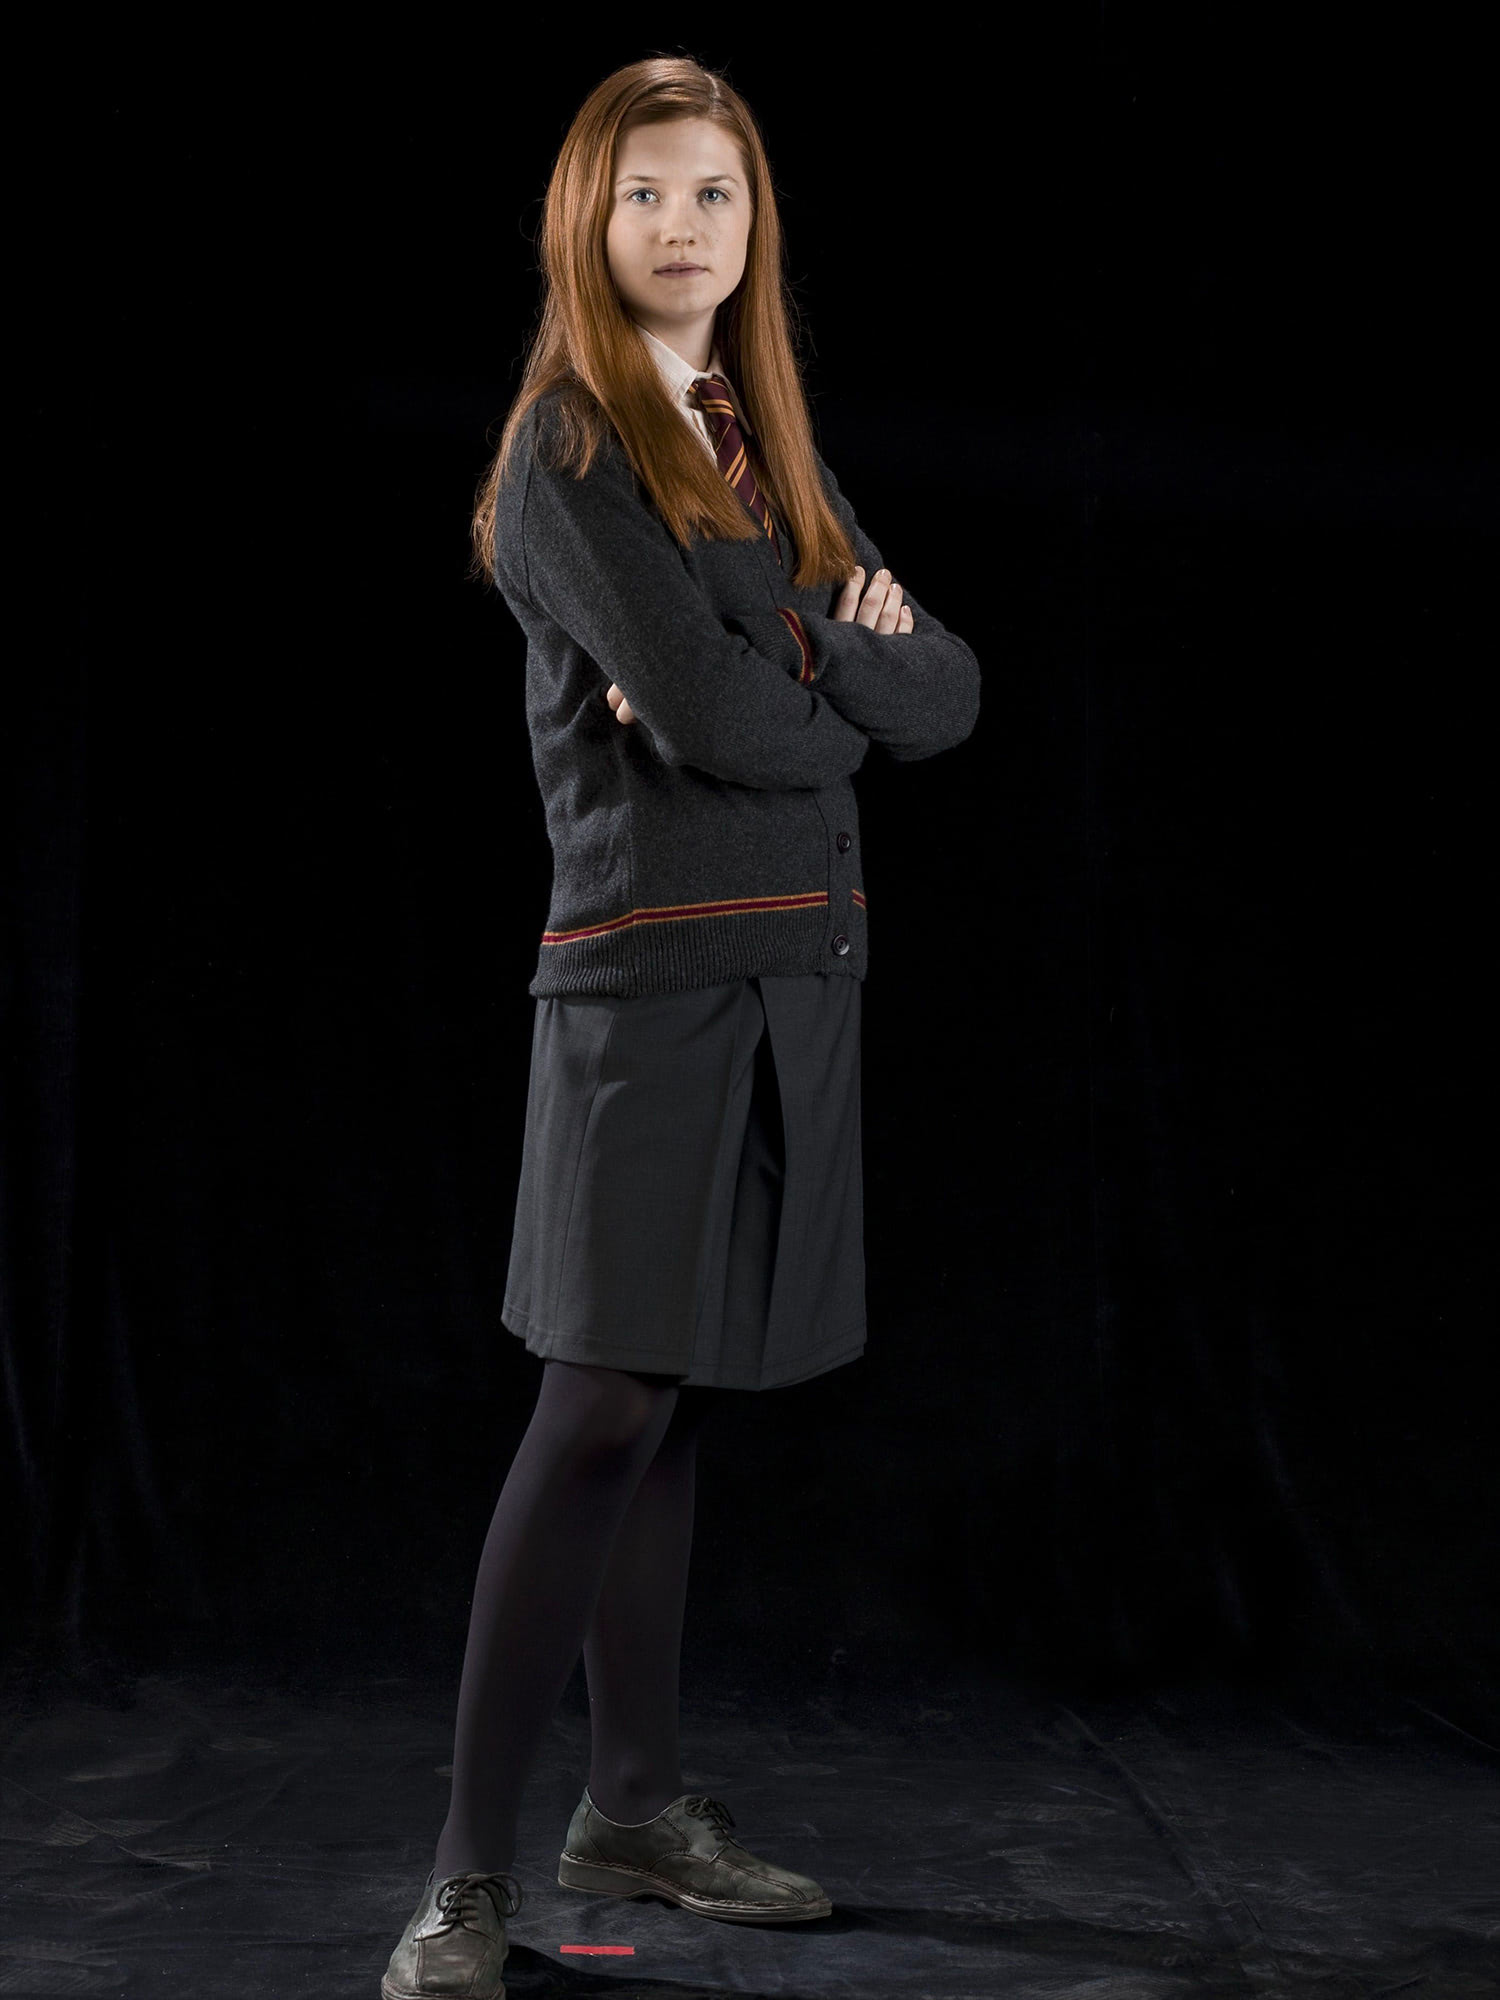 debora rankin recommends pictures of ginny weasley from harry potter pic